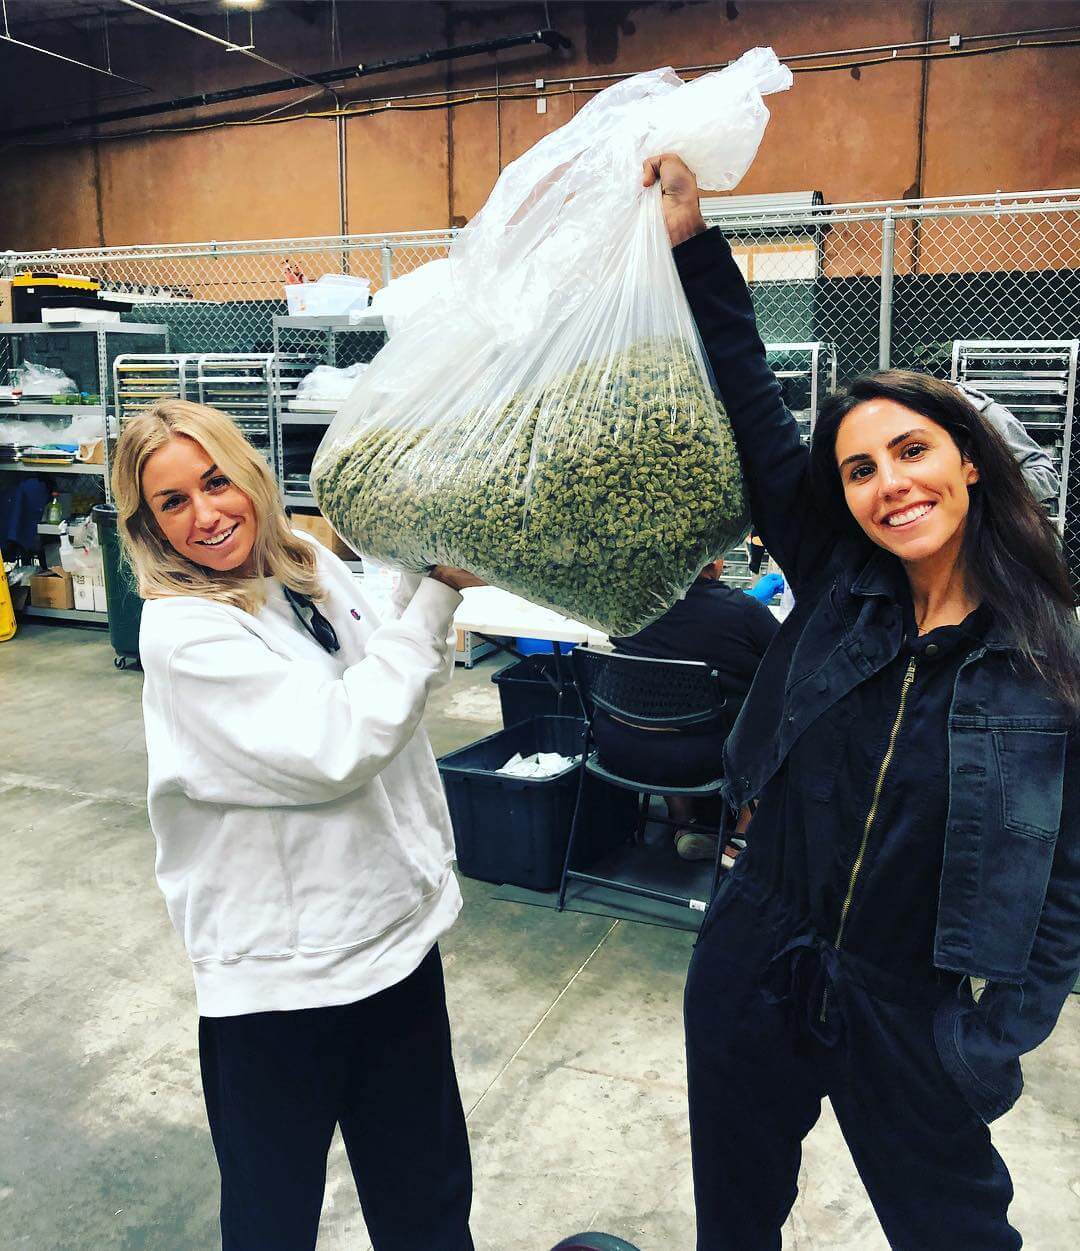 Kate Miller, the head of Miss Grass, holding a large bag of cannabis buds